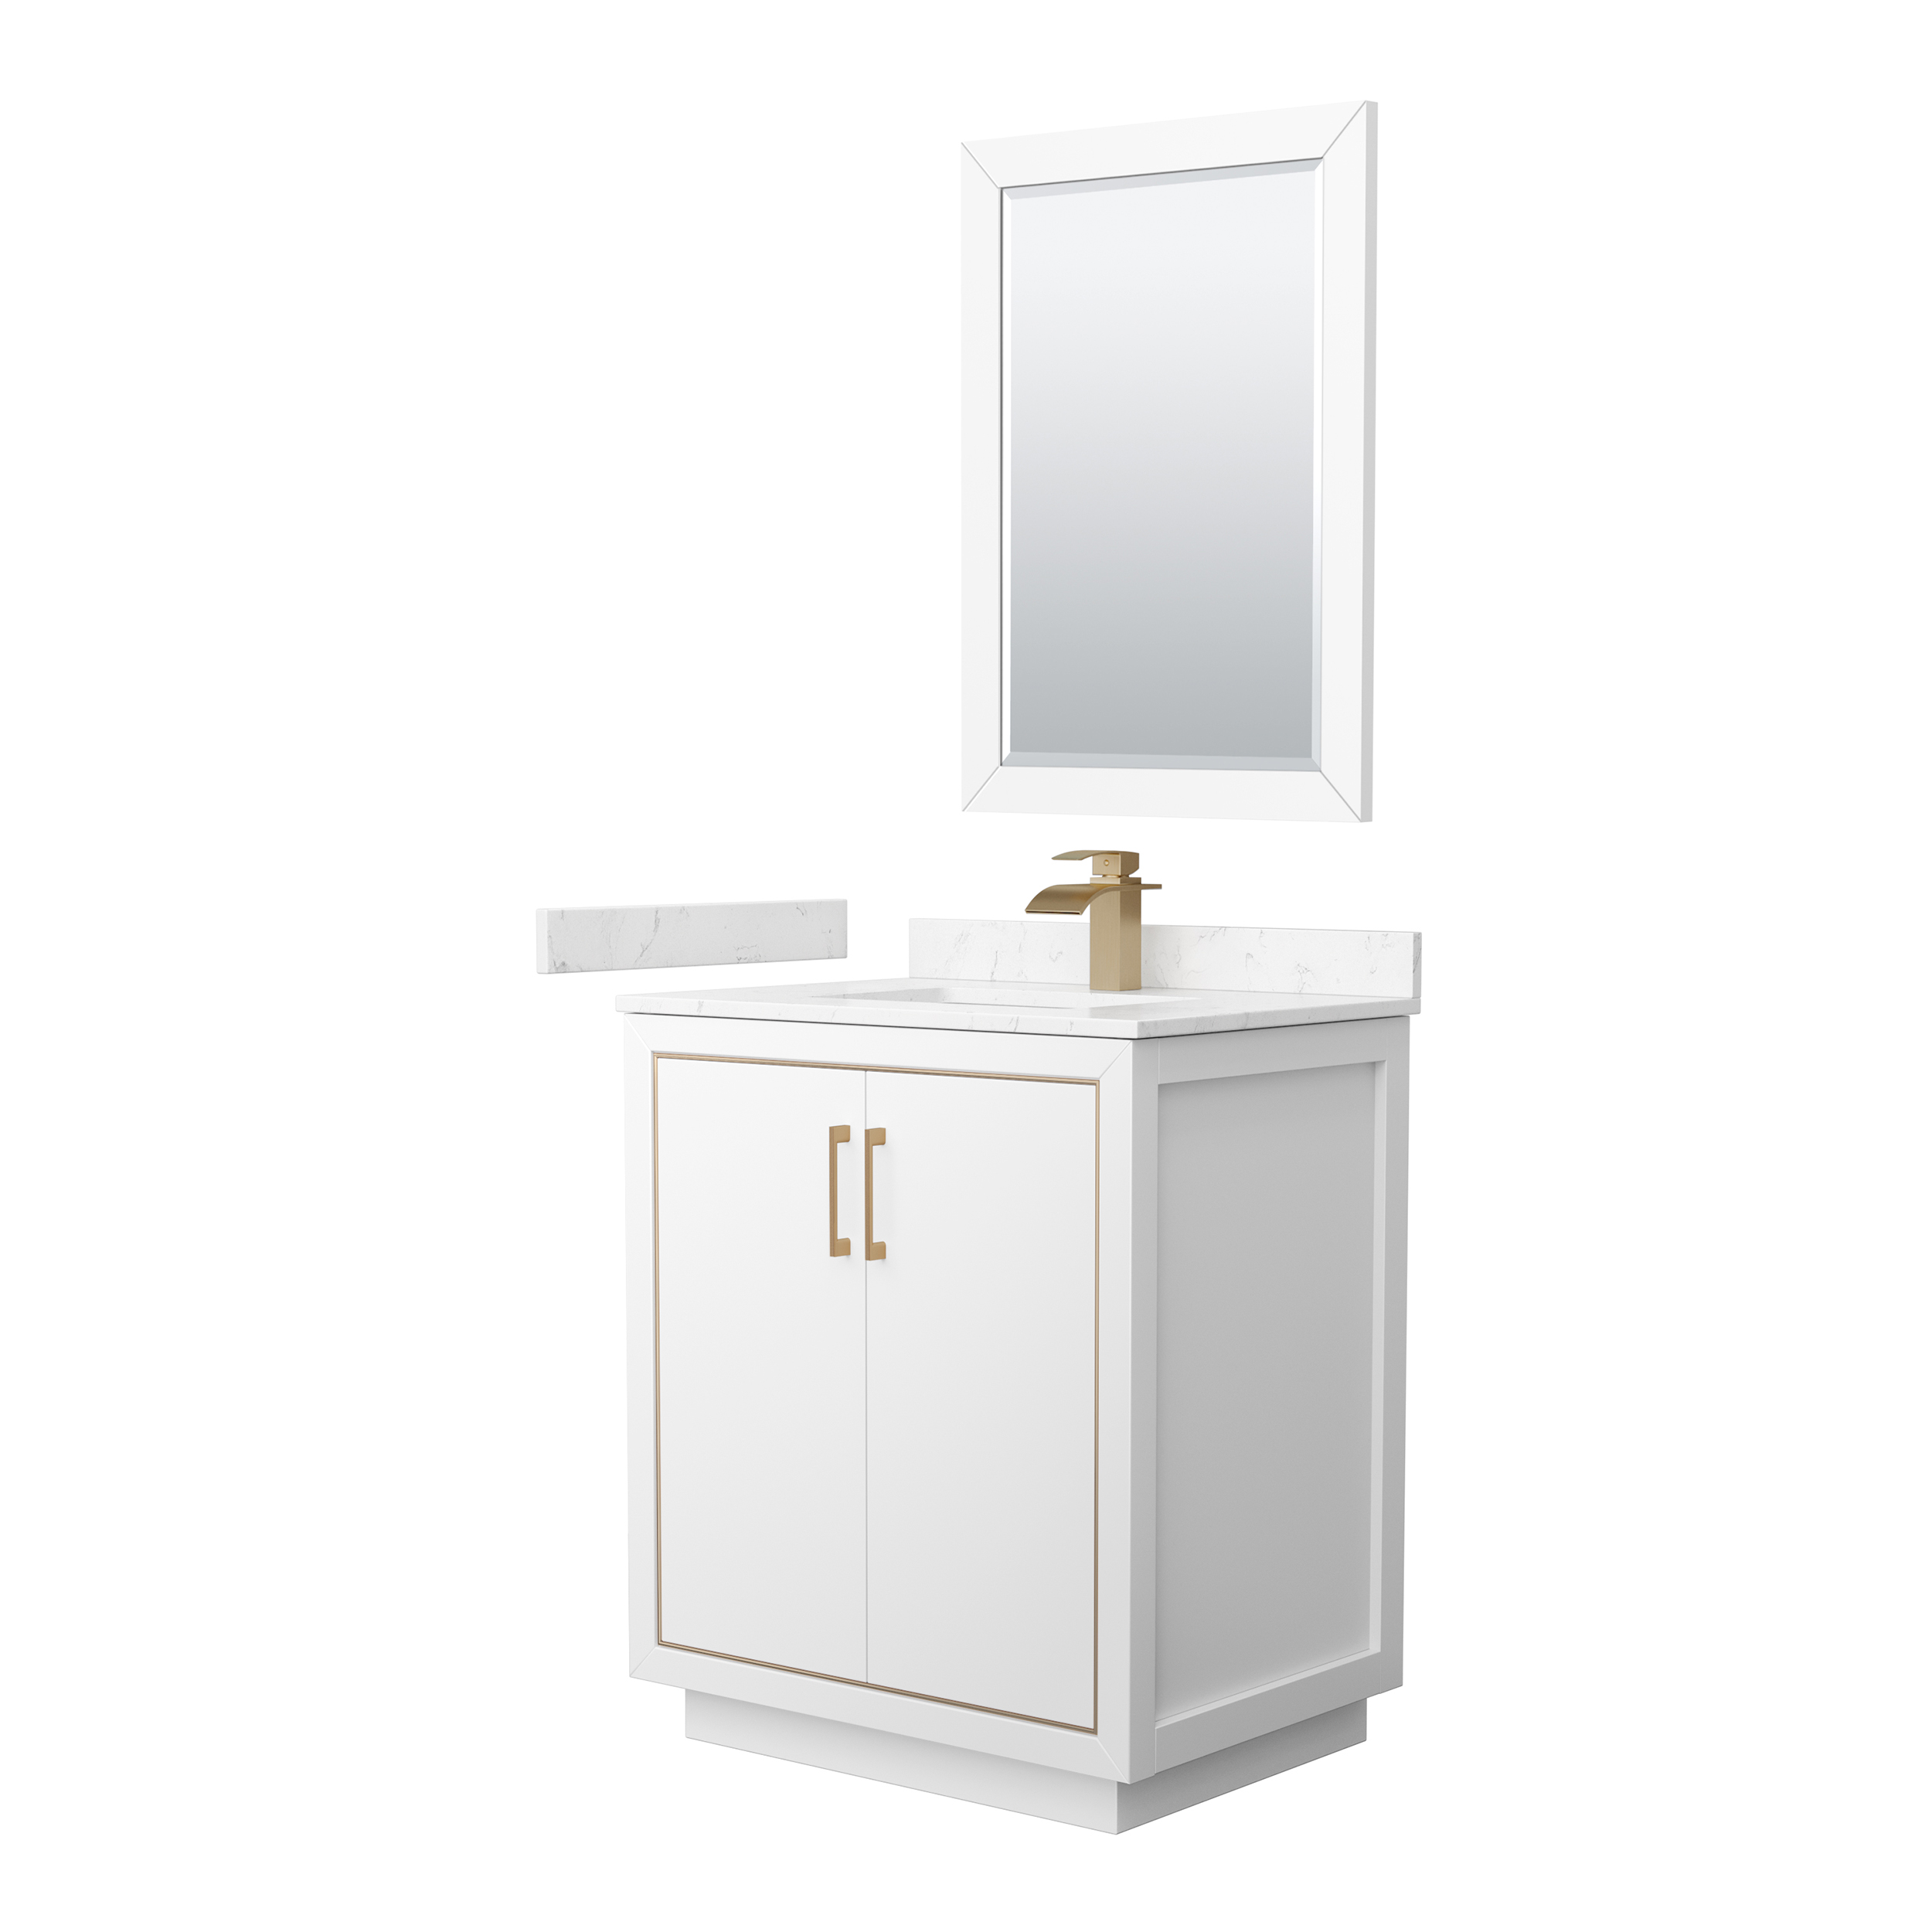 Icon 30" Single Vanity with optional Cultured Marble Counter - White WC-1111-30-SGL-VAN-WHT-